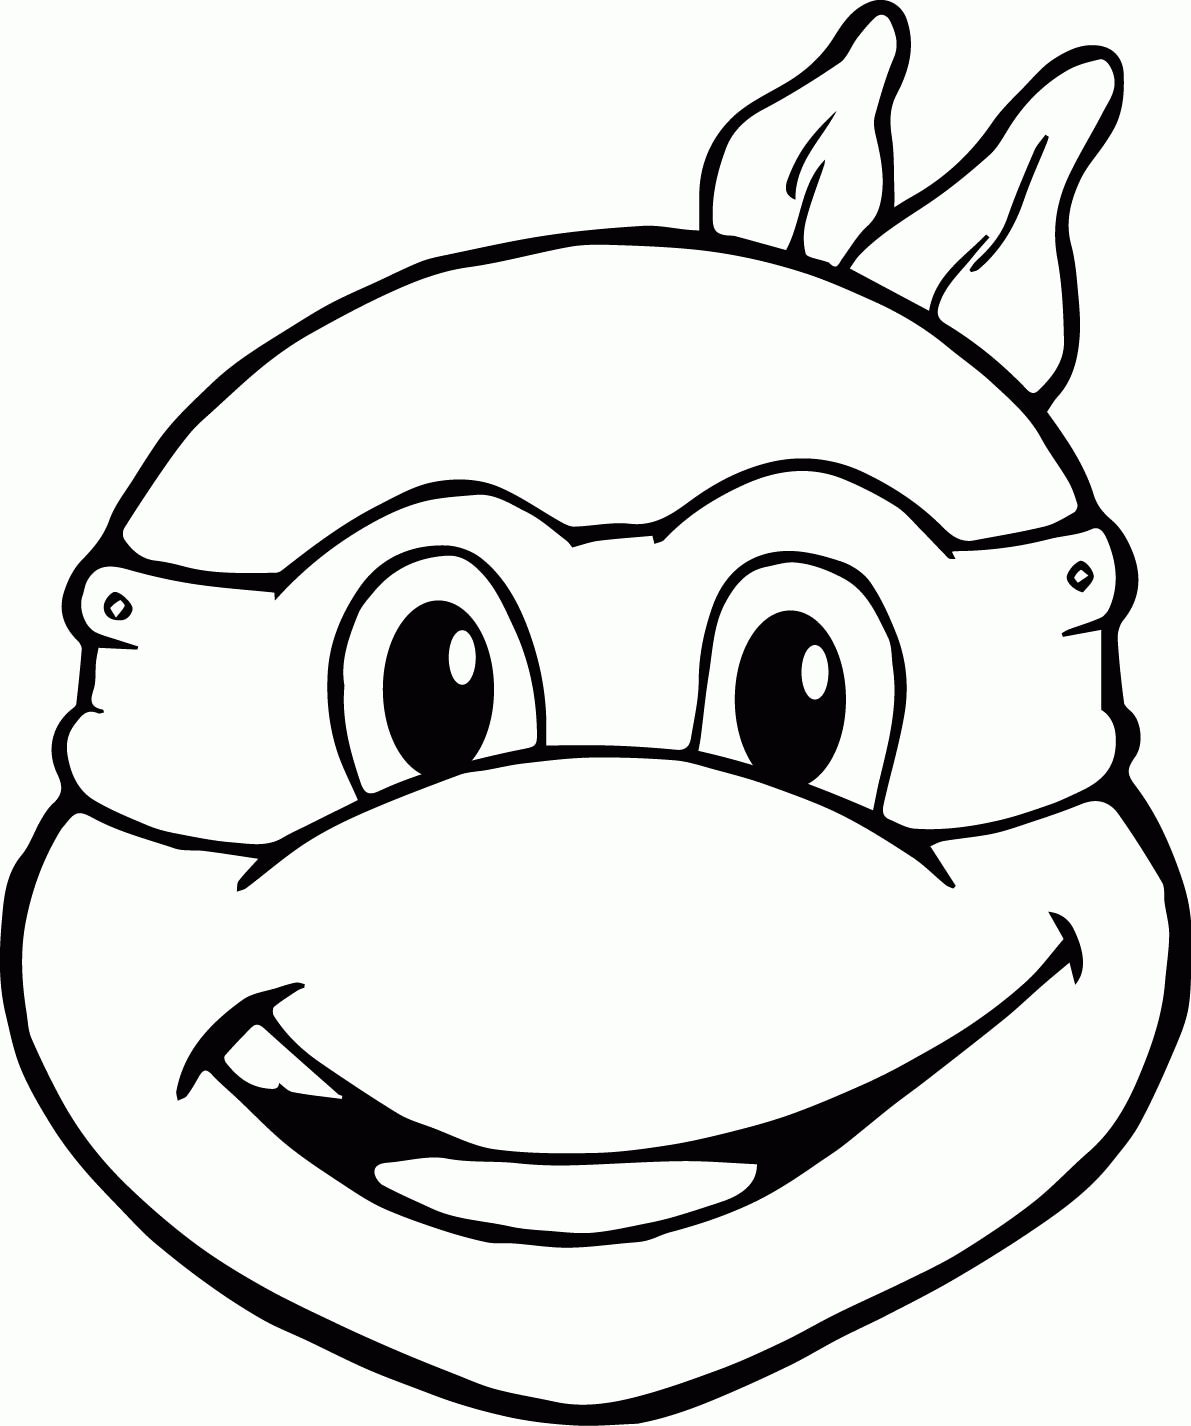 Ninja Turtles Coloring Pages Head To Head | Wecoloringpage